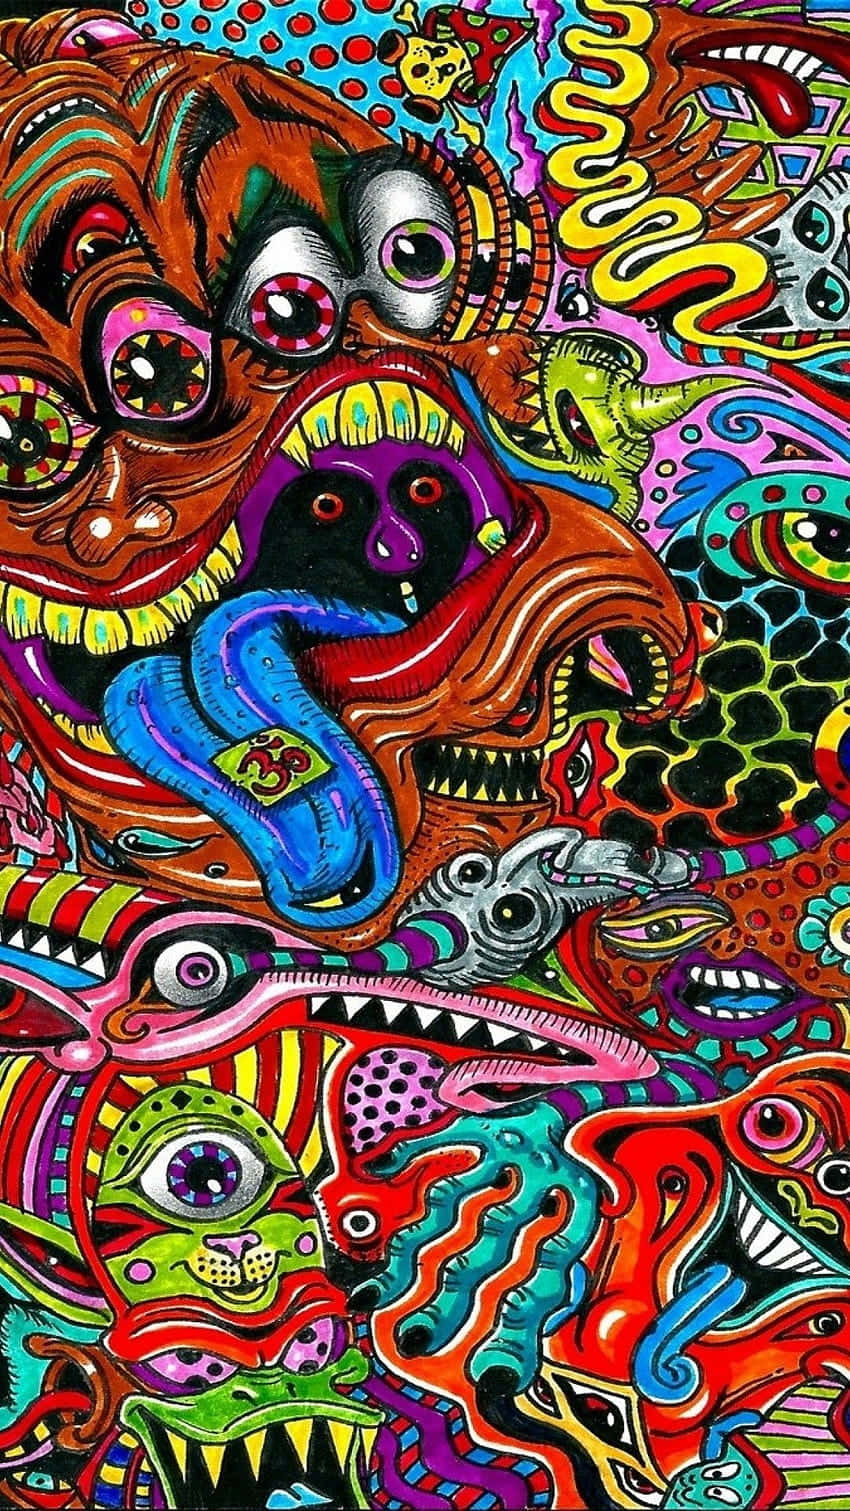 A Colorful Psychedelic Art Piece With Many Different Colors